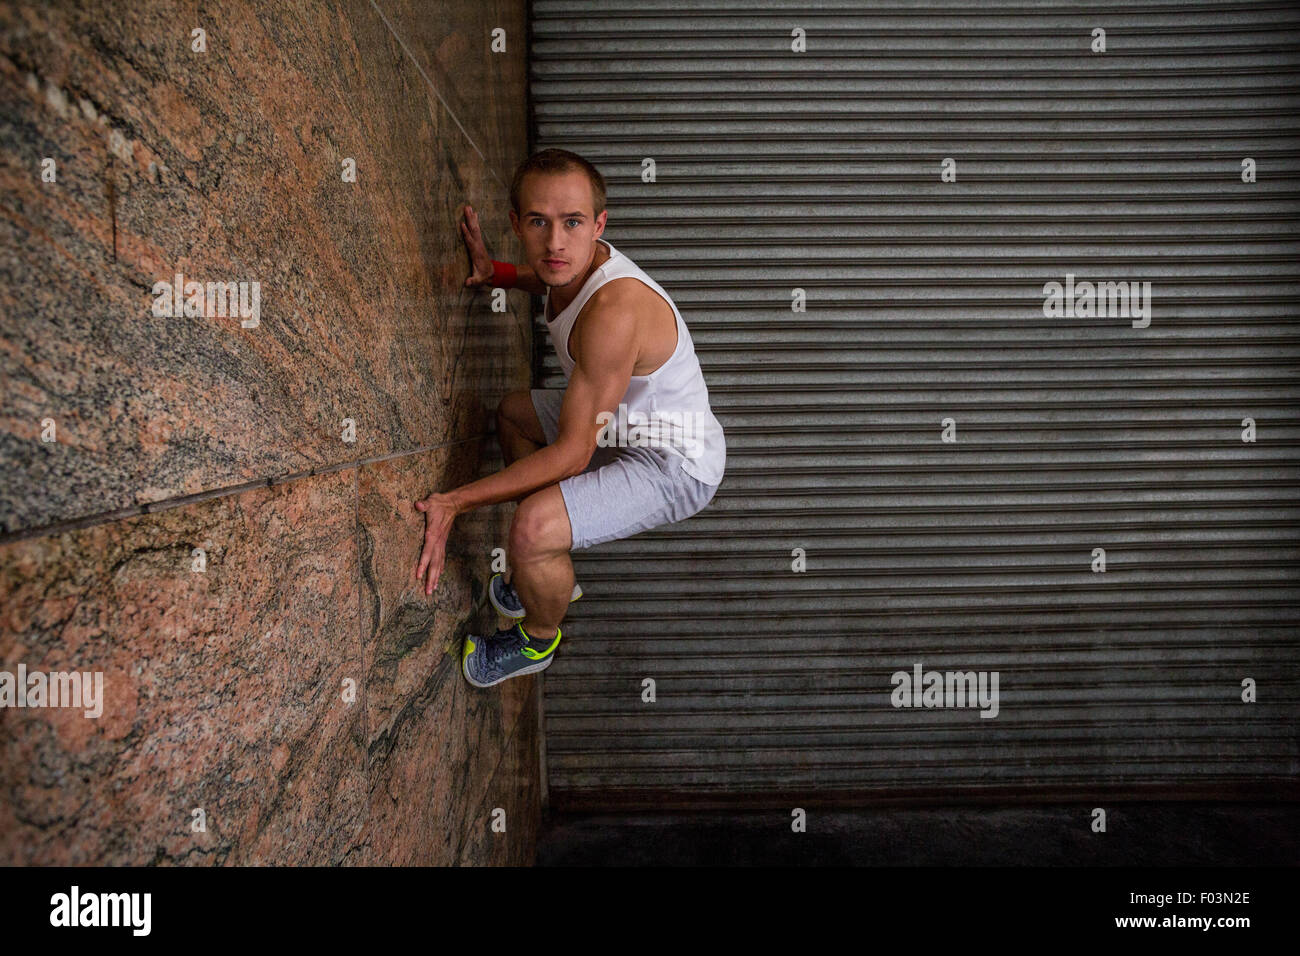 Extreme athlete gripping to wall Stock Photo